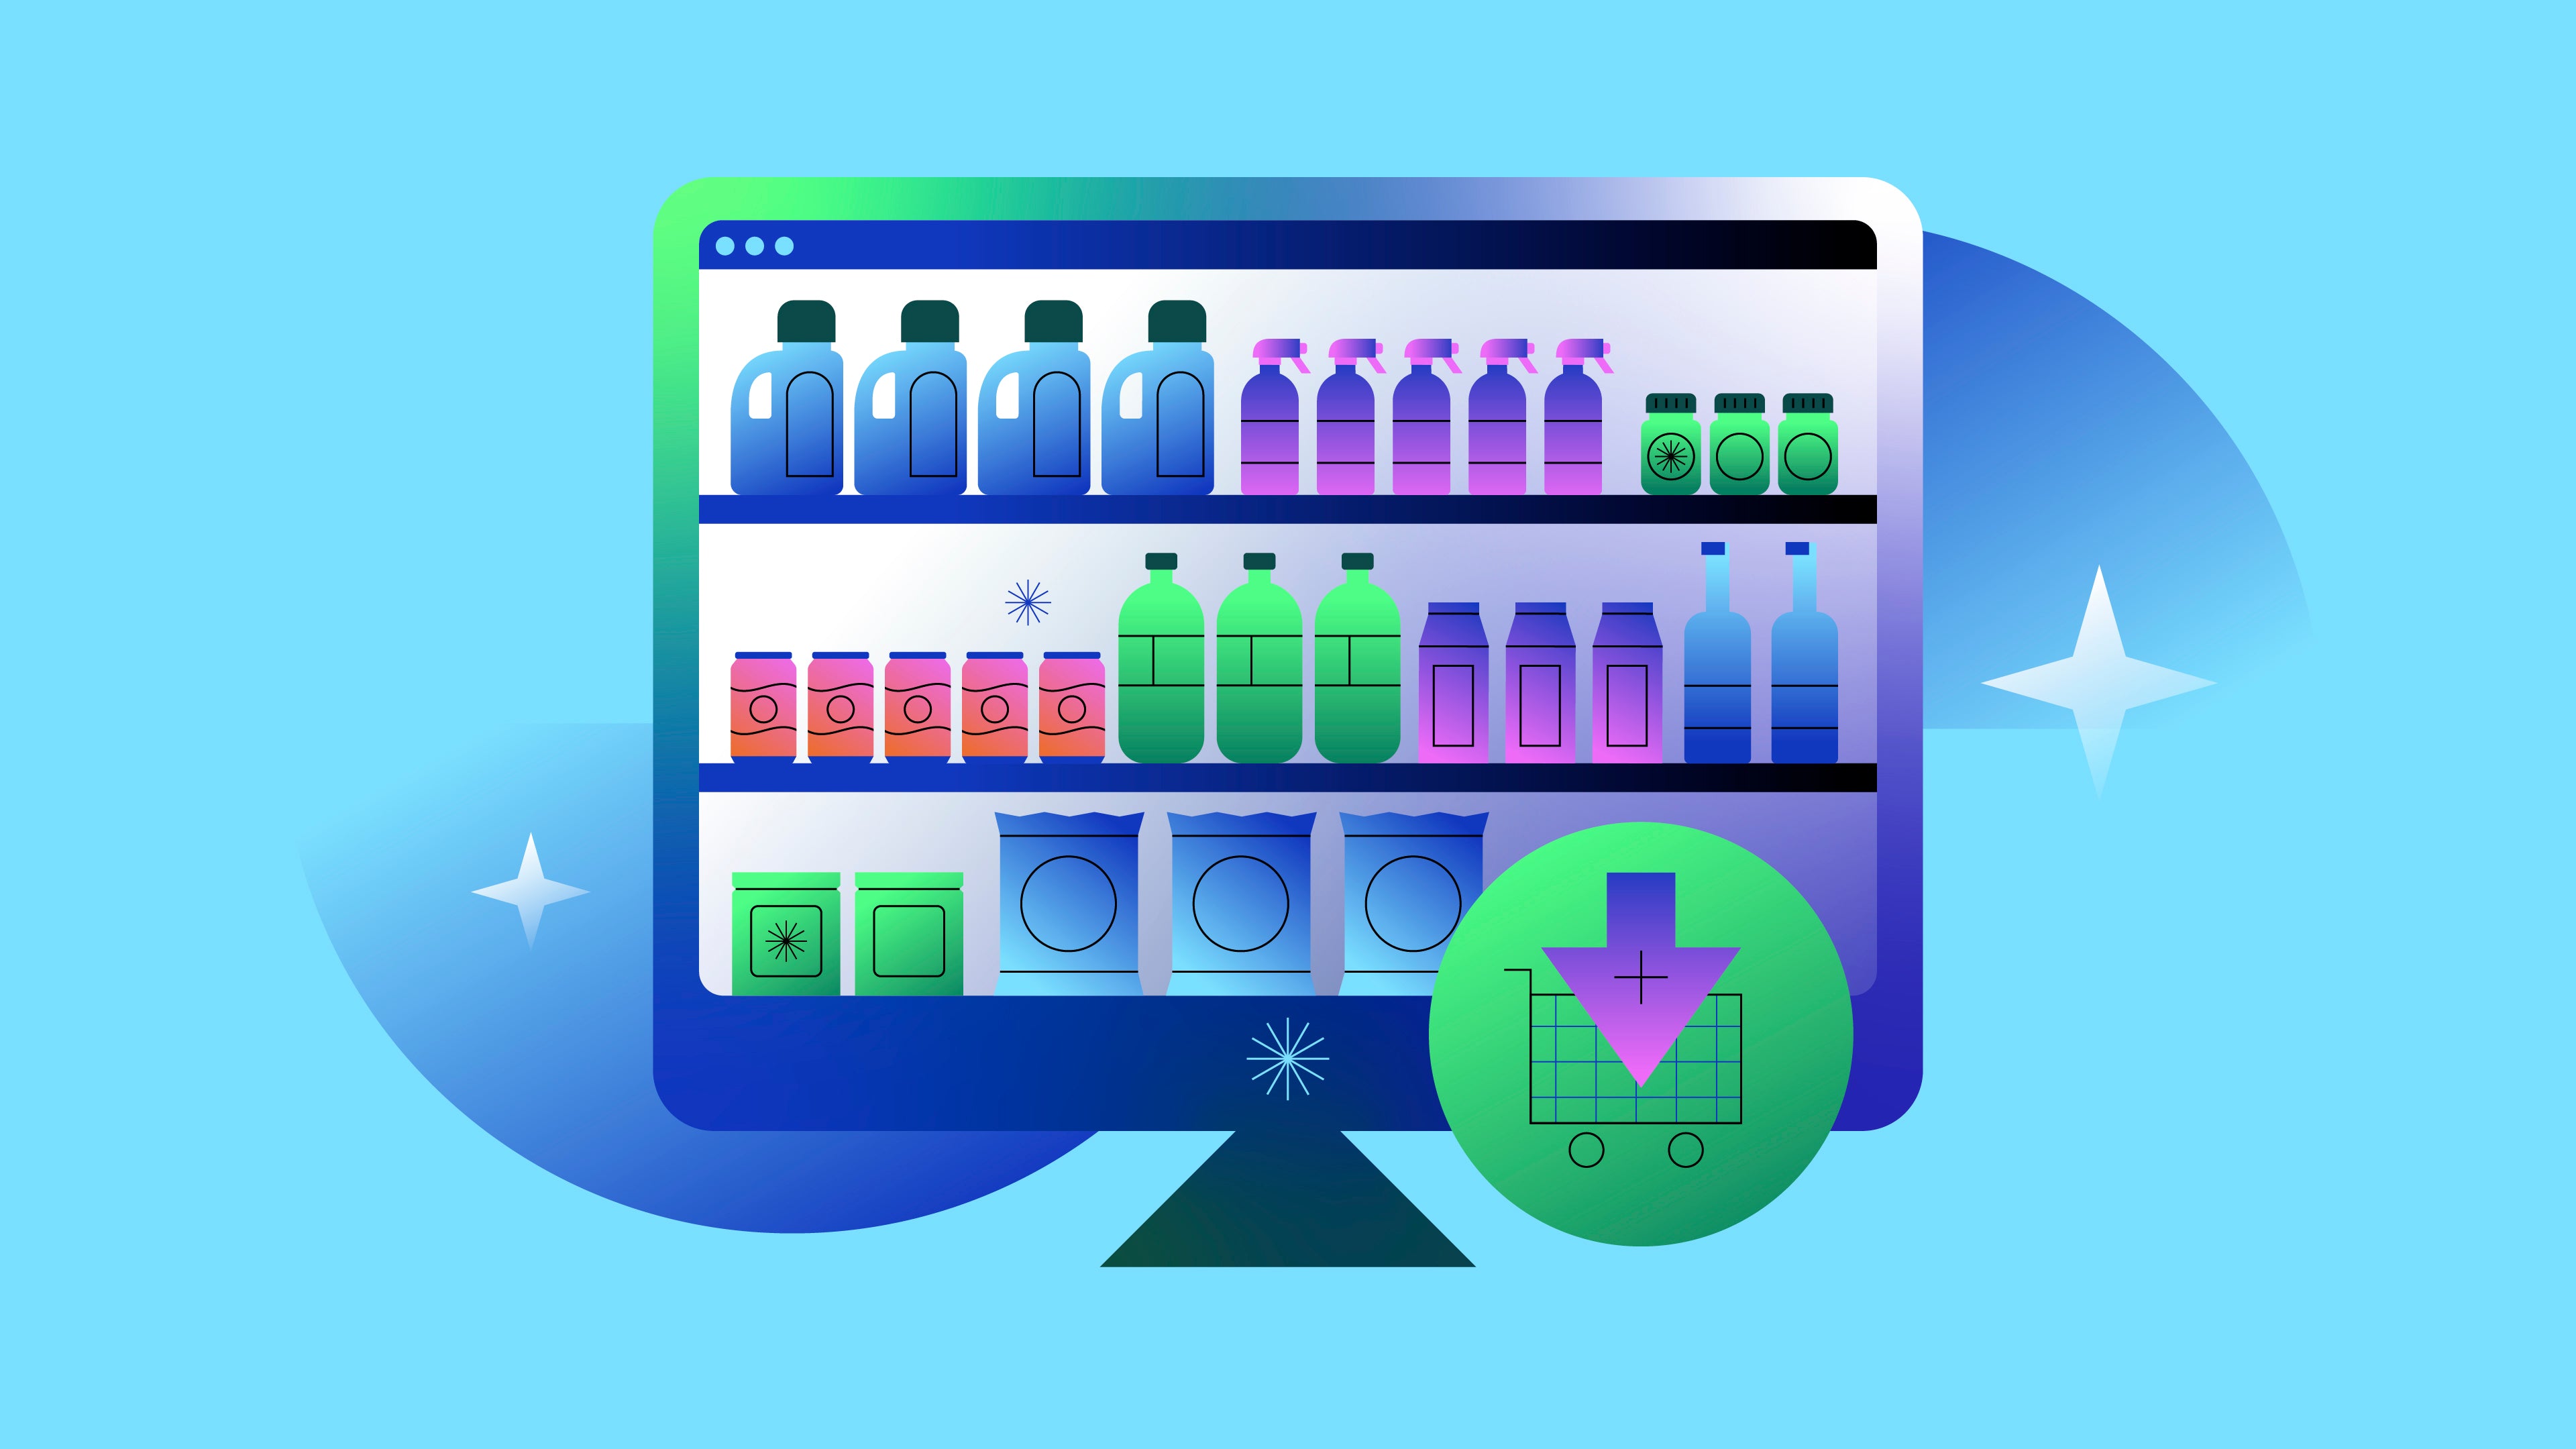 Illustration of a virtual shopping screen with various bottles and packages lined up on shelves, showing an online marketplace.